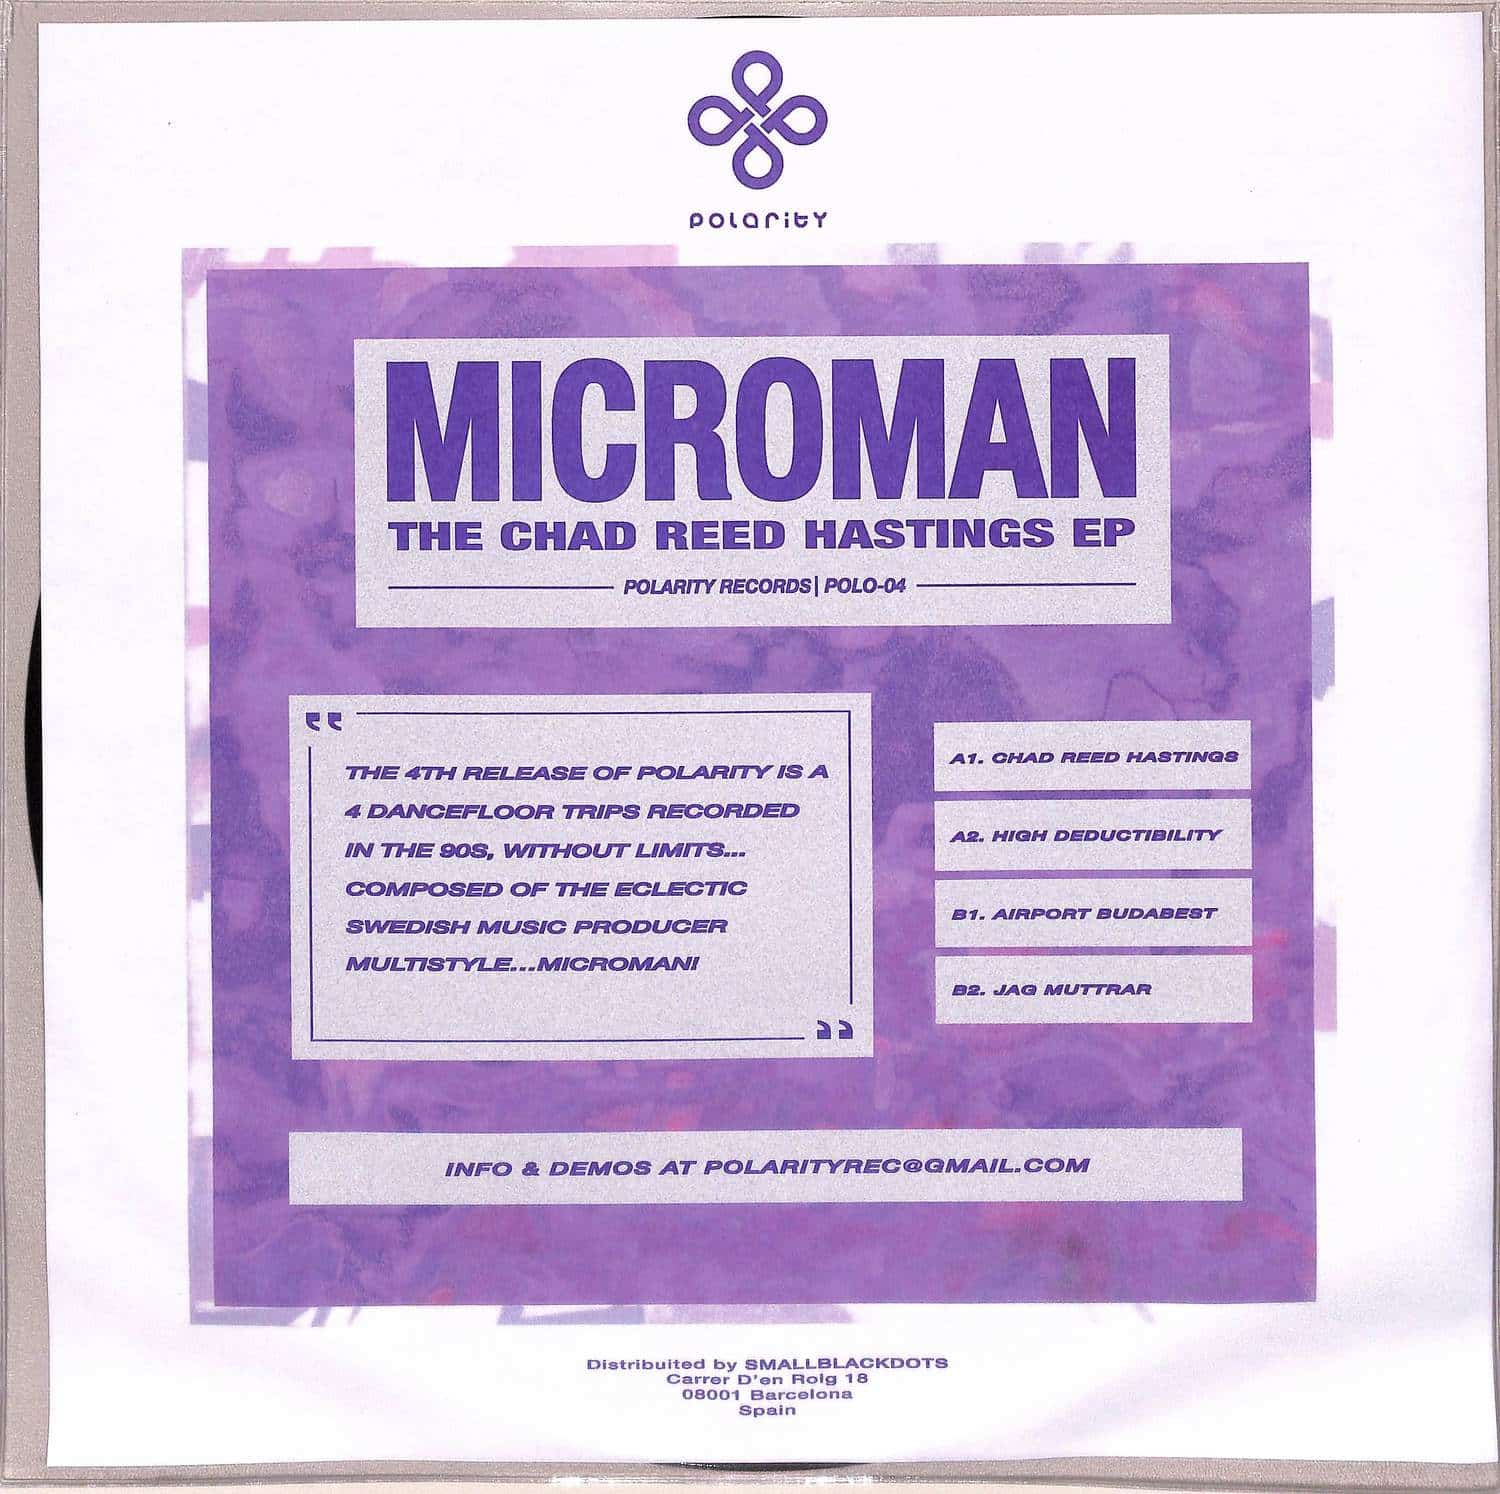 Microman - THE CHAD REED HASTINGS EP